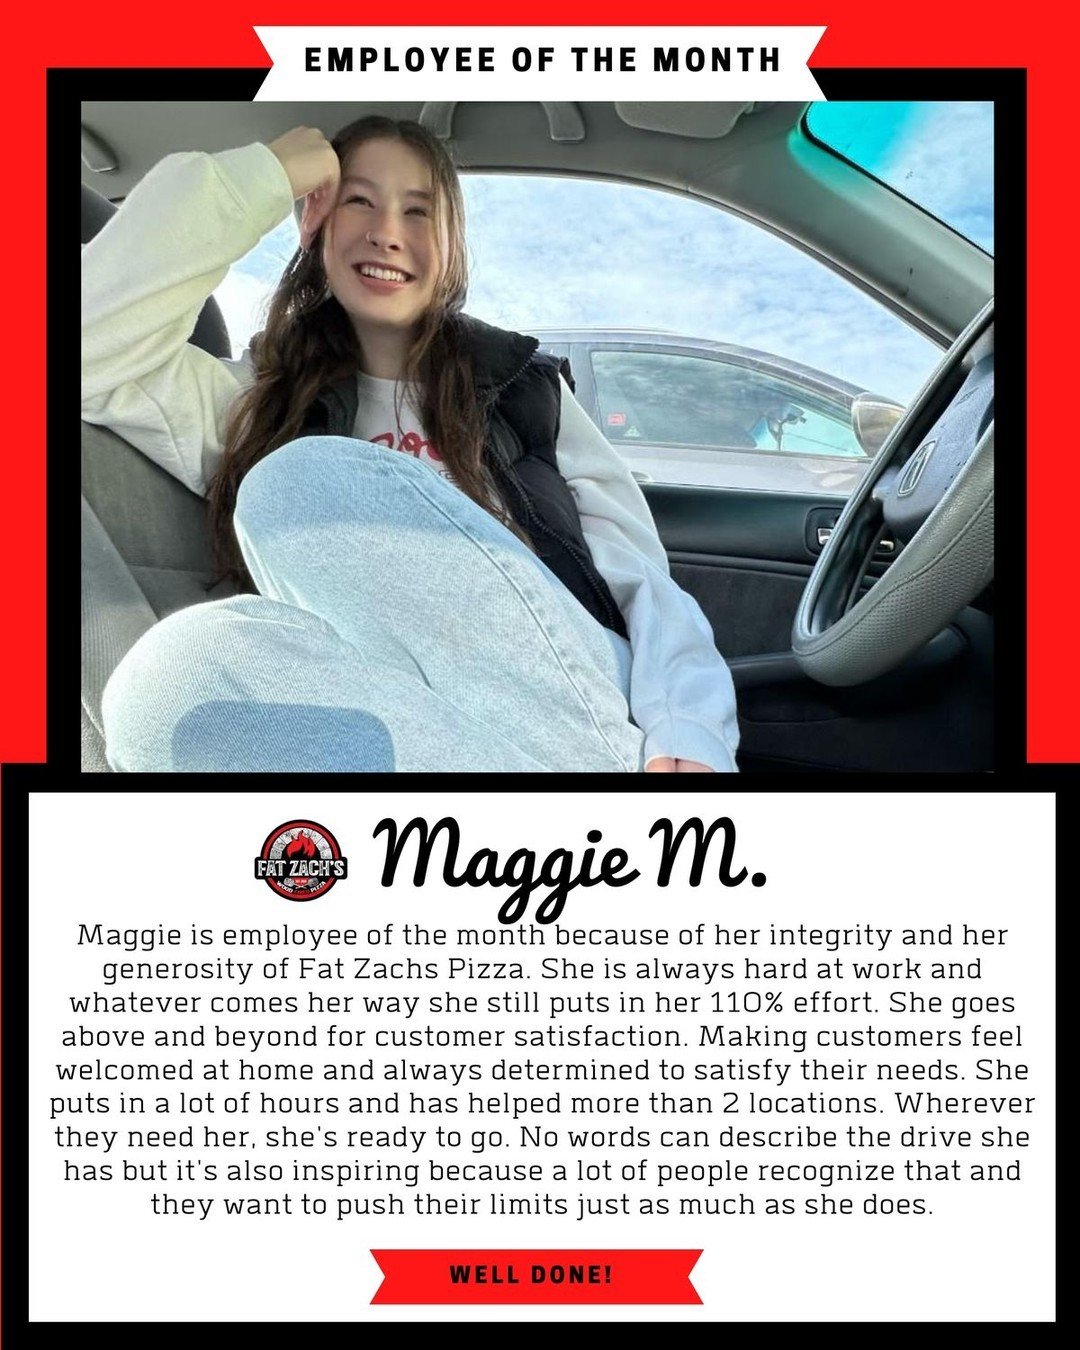 Well done, Maggie! 

fatzachspizza.com
.
.
.
.
#eatlocal #smallbusiness #downtown #smallbusiness #puyallup #pnw #pizza #yummy #instagood  #food #foodporn #catering #mobile #sumner #photooftheday #fatzachspizza #goodeats #foodtruck #foodtrucklife #sup